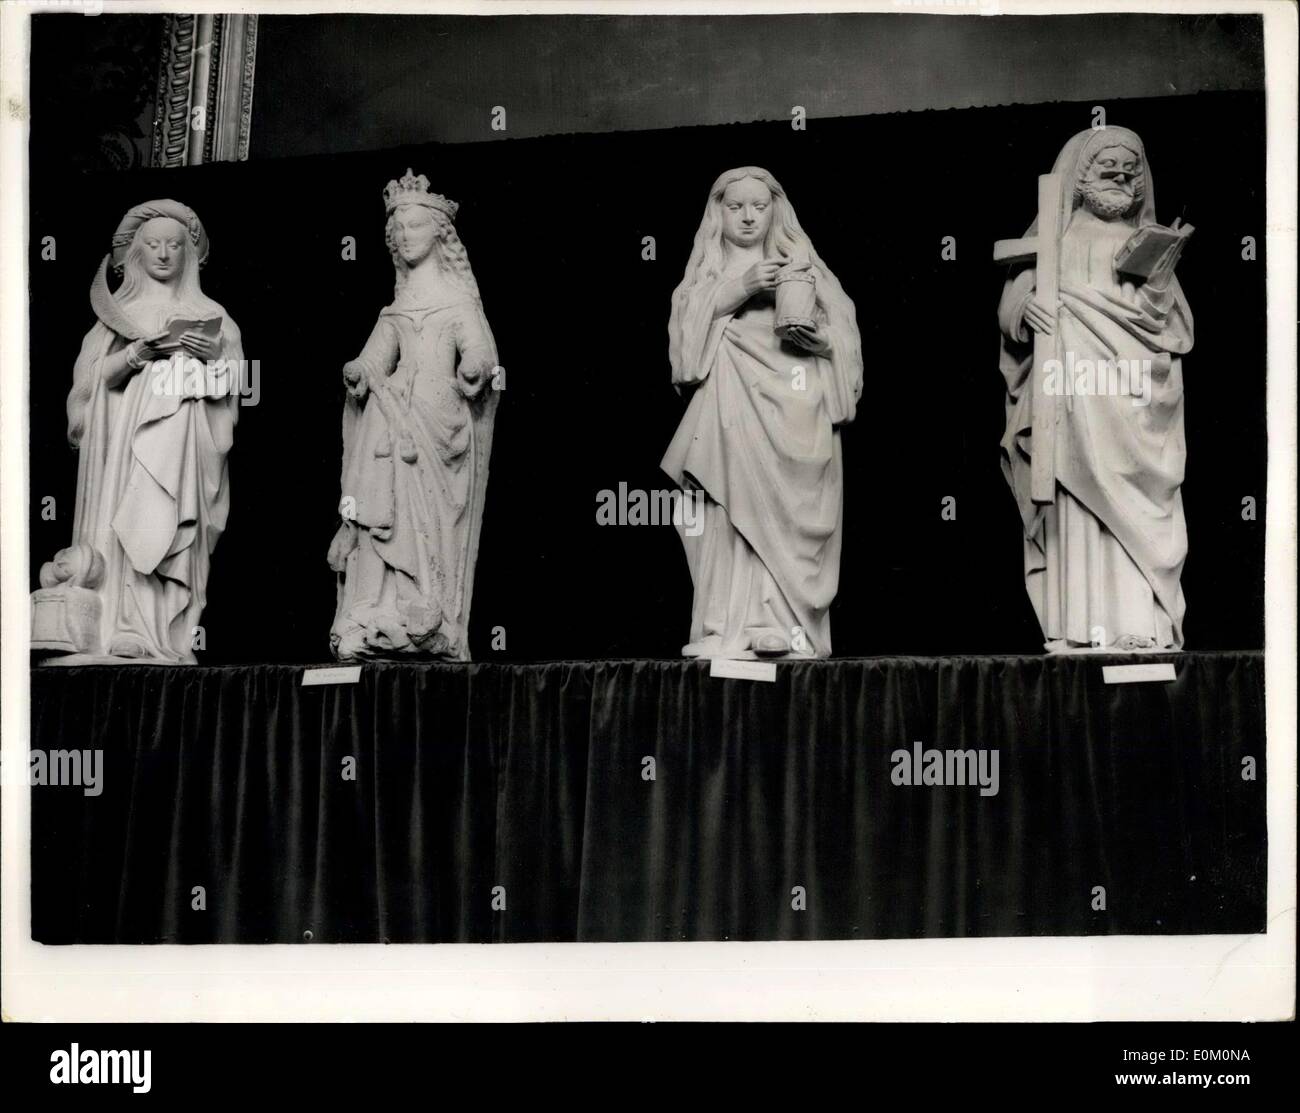 Feb. 09, 1953 - Treasure From The Abbey On Show At St. James's Palace.. Priceless Relics of The Past... The closing of Westminster Abbey in order that Coronation Preparations can be carried out - has made it possible for a number of the famous Abbey relics and treasures to be exhibited to the Public.. The exhibition is being held at St. James's Palace - and has been authorised by H.M. The Queen. These exhibition includes a priceless collection of 17th. century silder-gilt flagons, cups and other plate no longer used on the altar Stock Photo